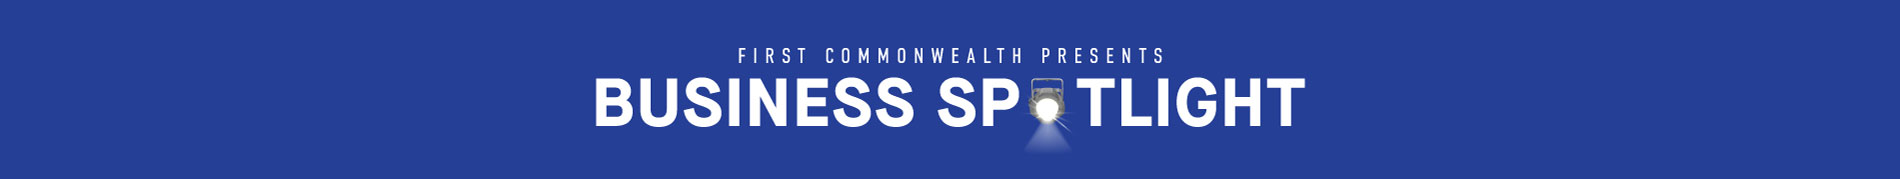 First Commonwealth Presents Business Spotlight